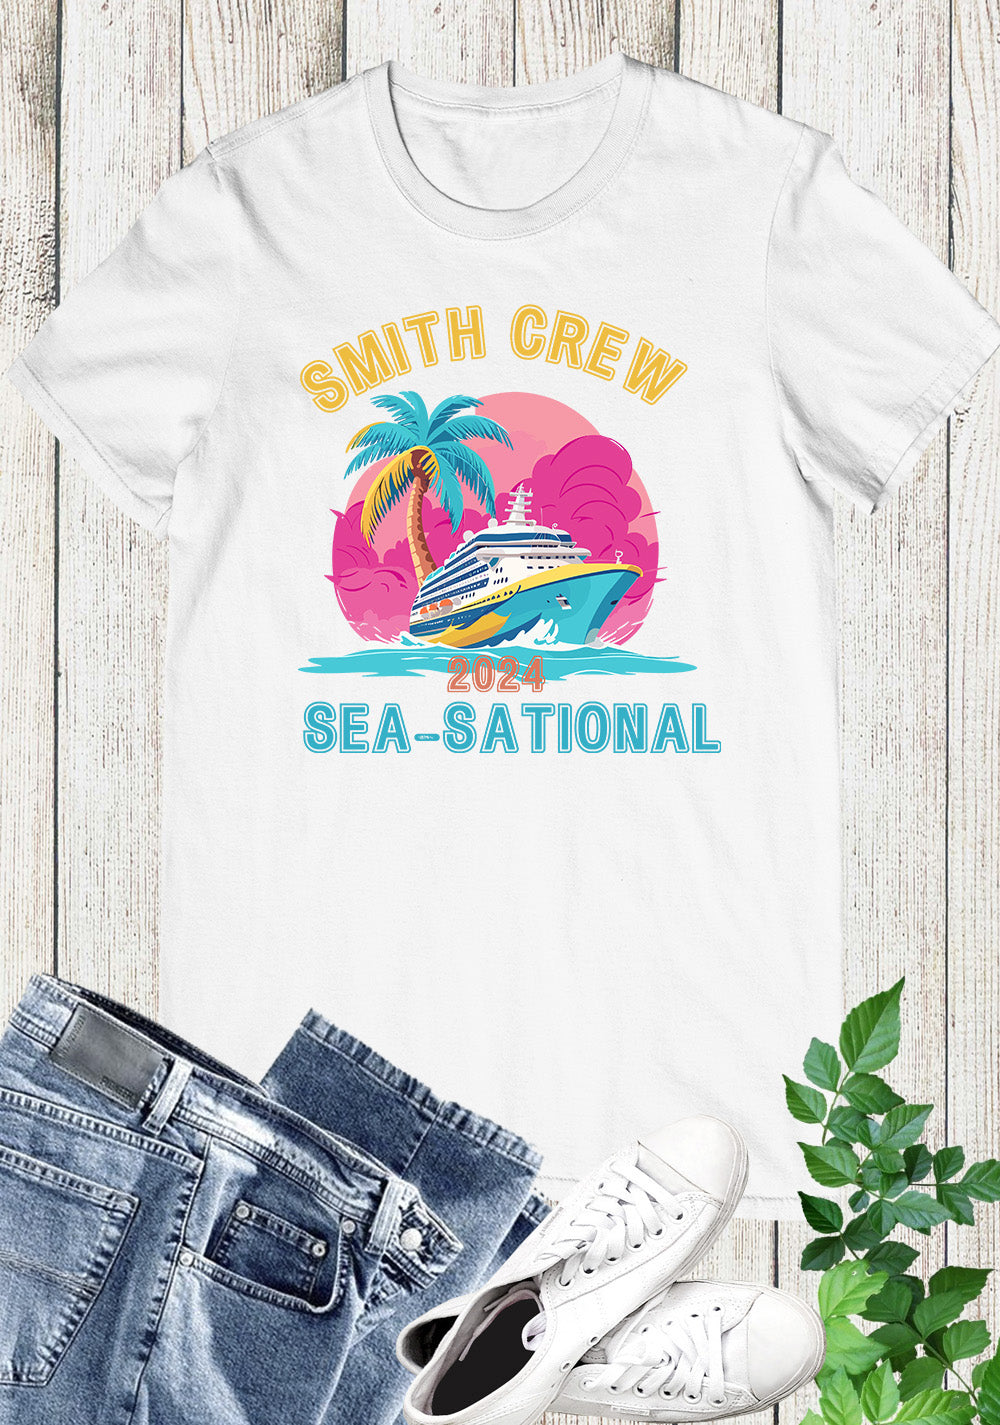 Personalized Cruise Crew Vacation T Shirt